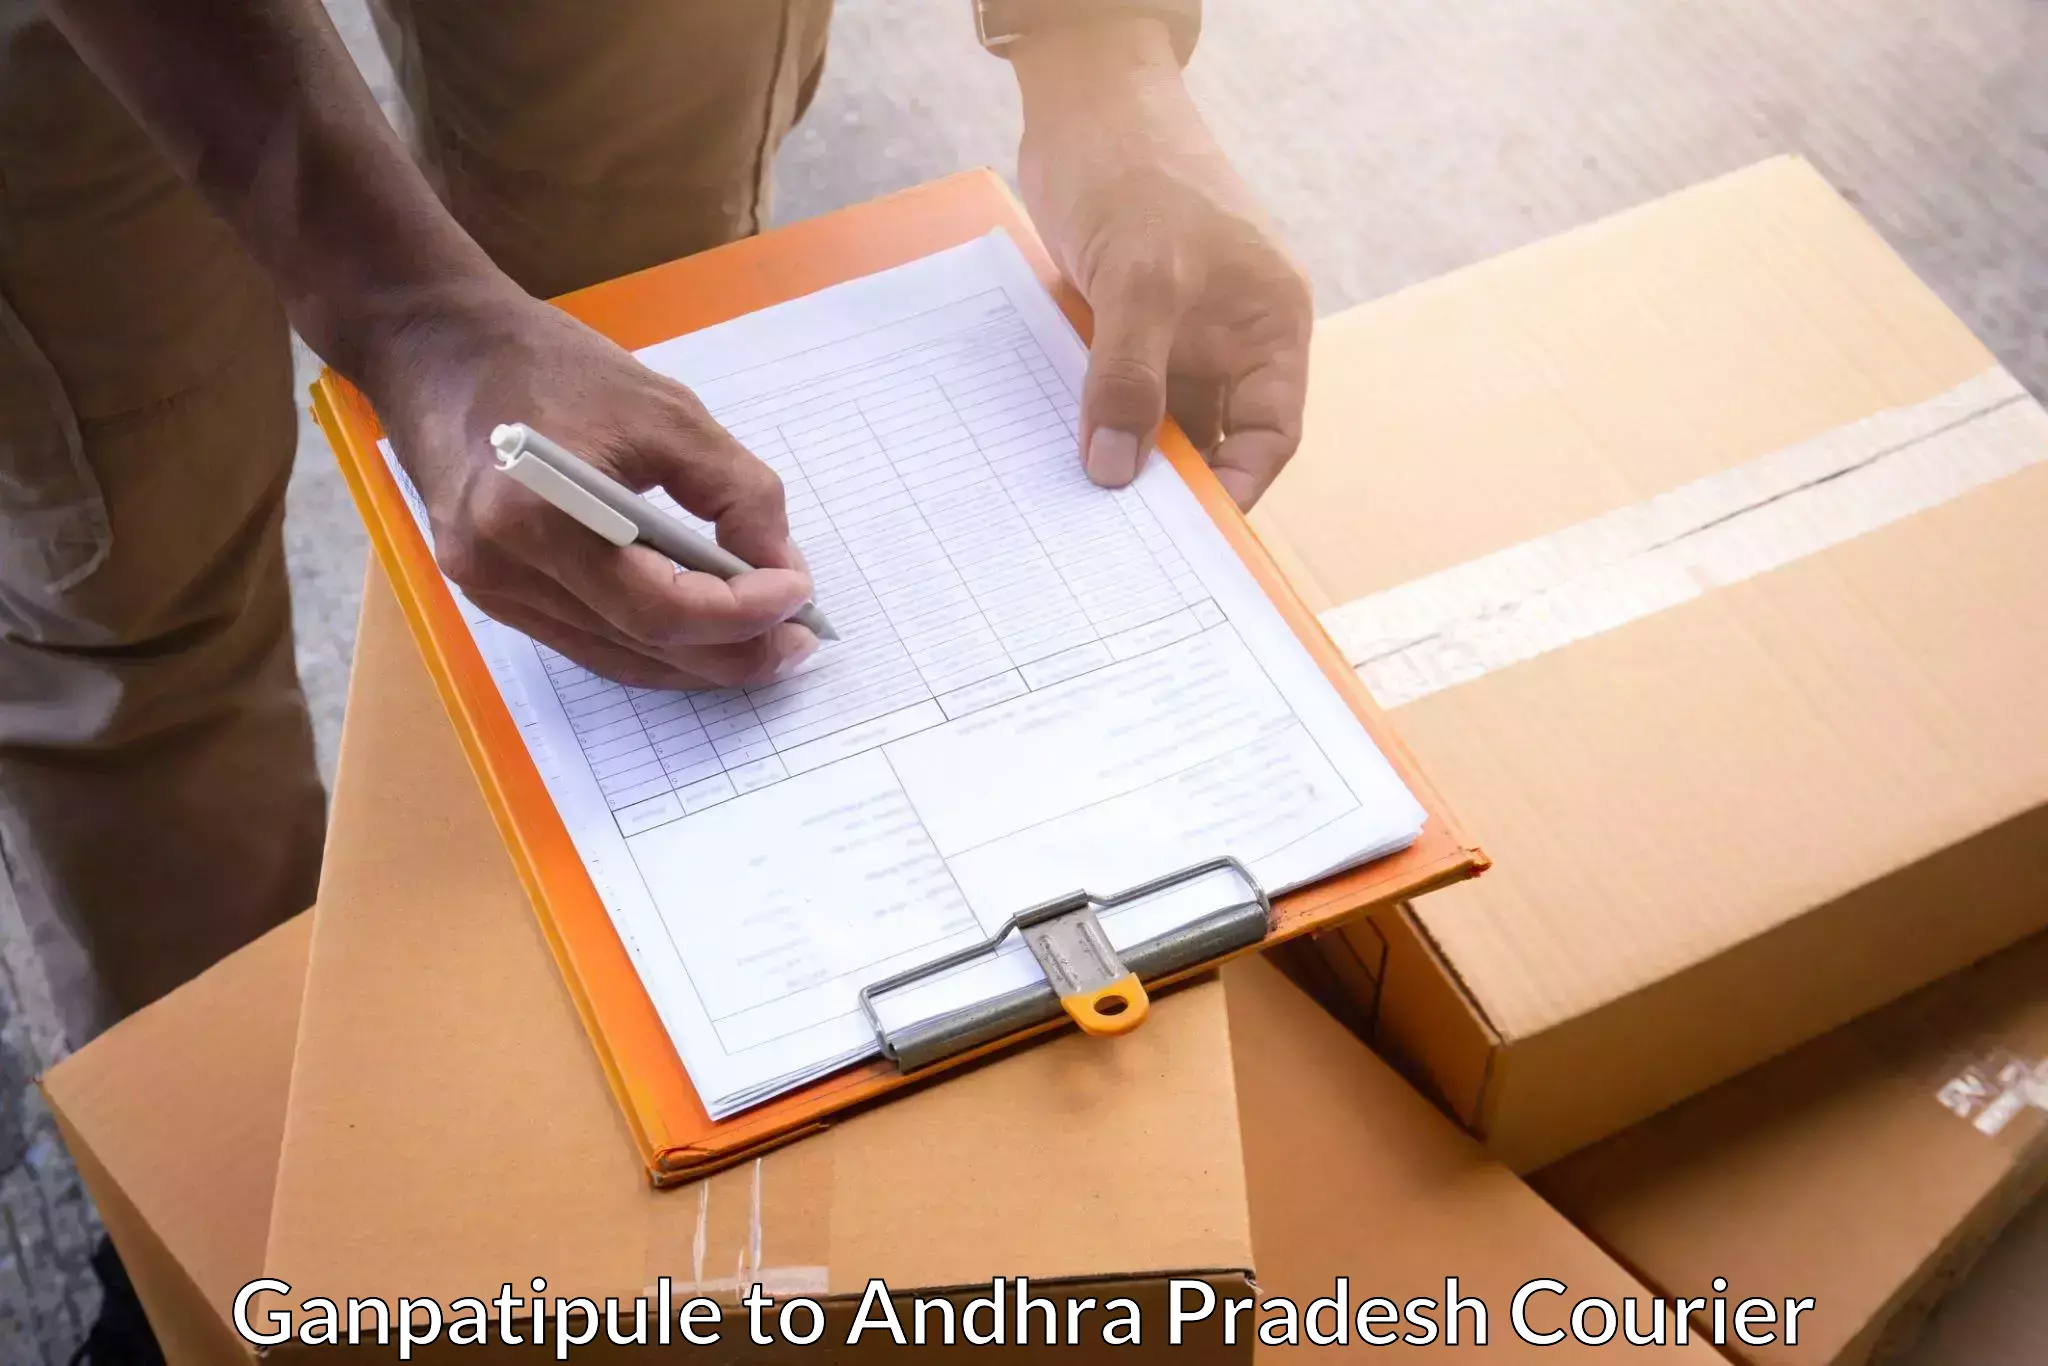 High value parcel delivery in Ganpatipule to Yellamanchili